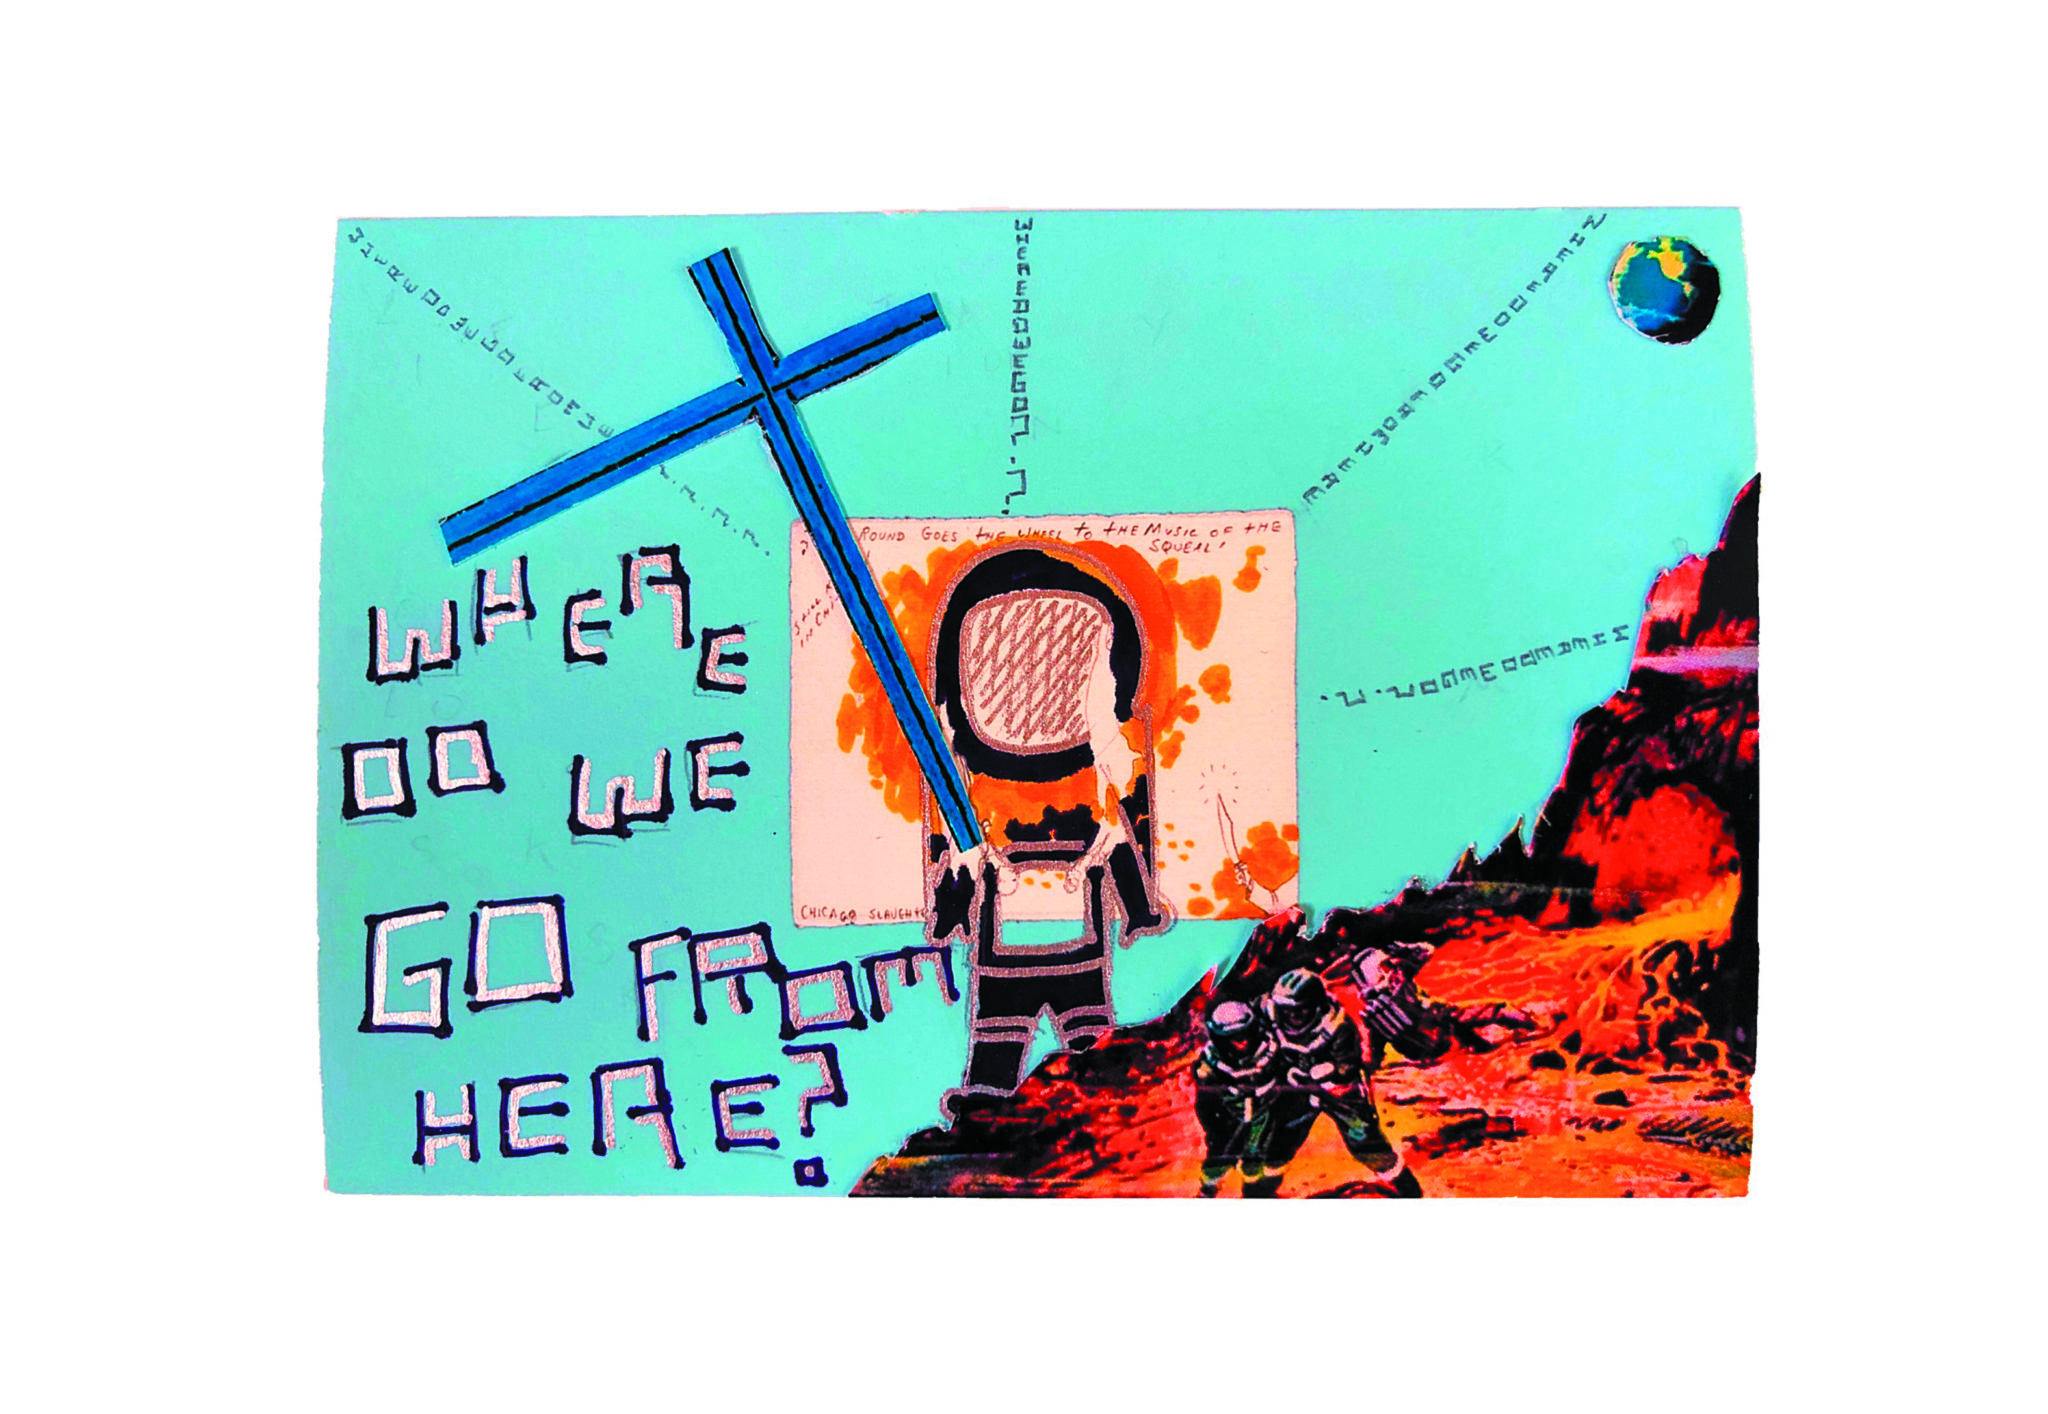 Where Do We Go From Here by Mark Mothersbaugh x Beatie Wolfe_098